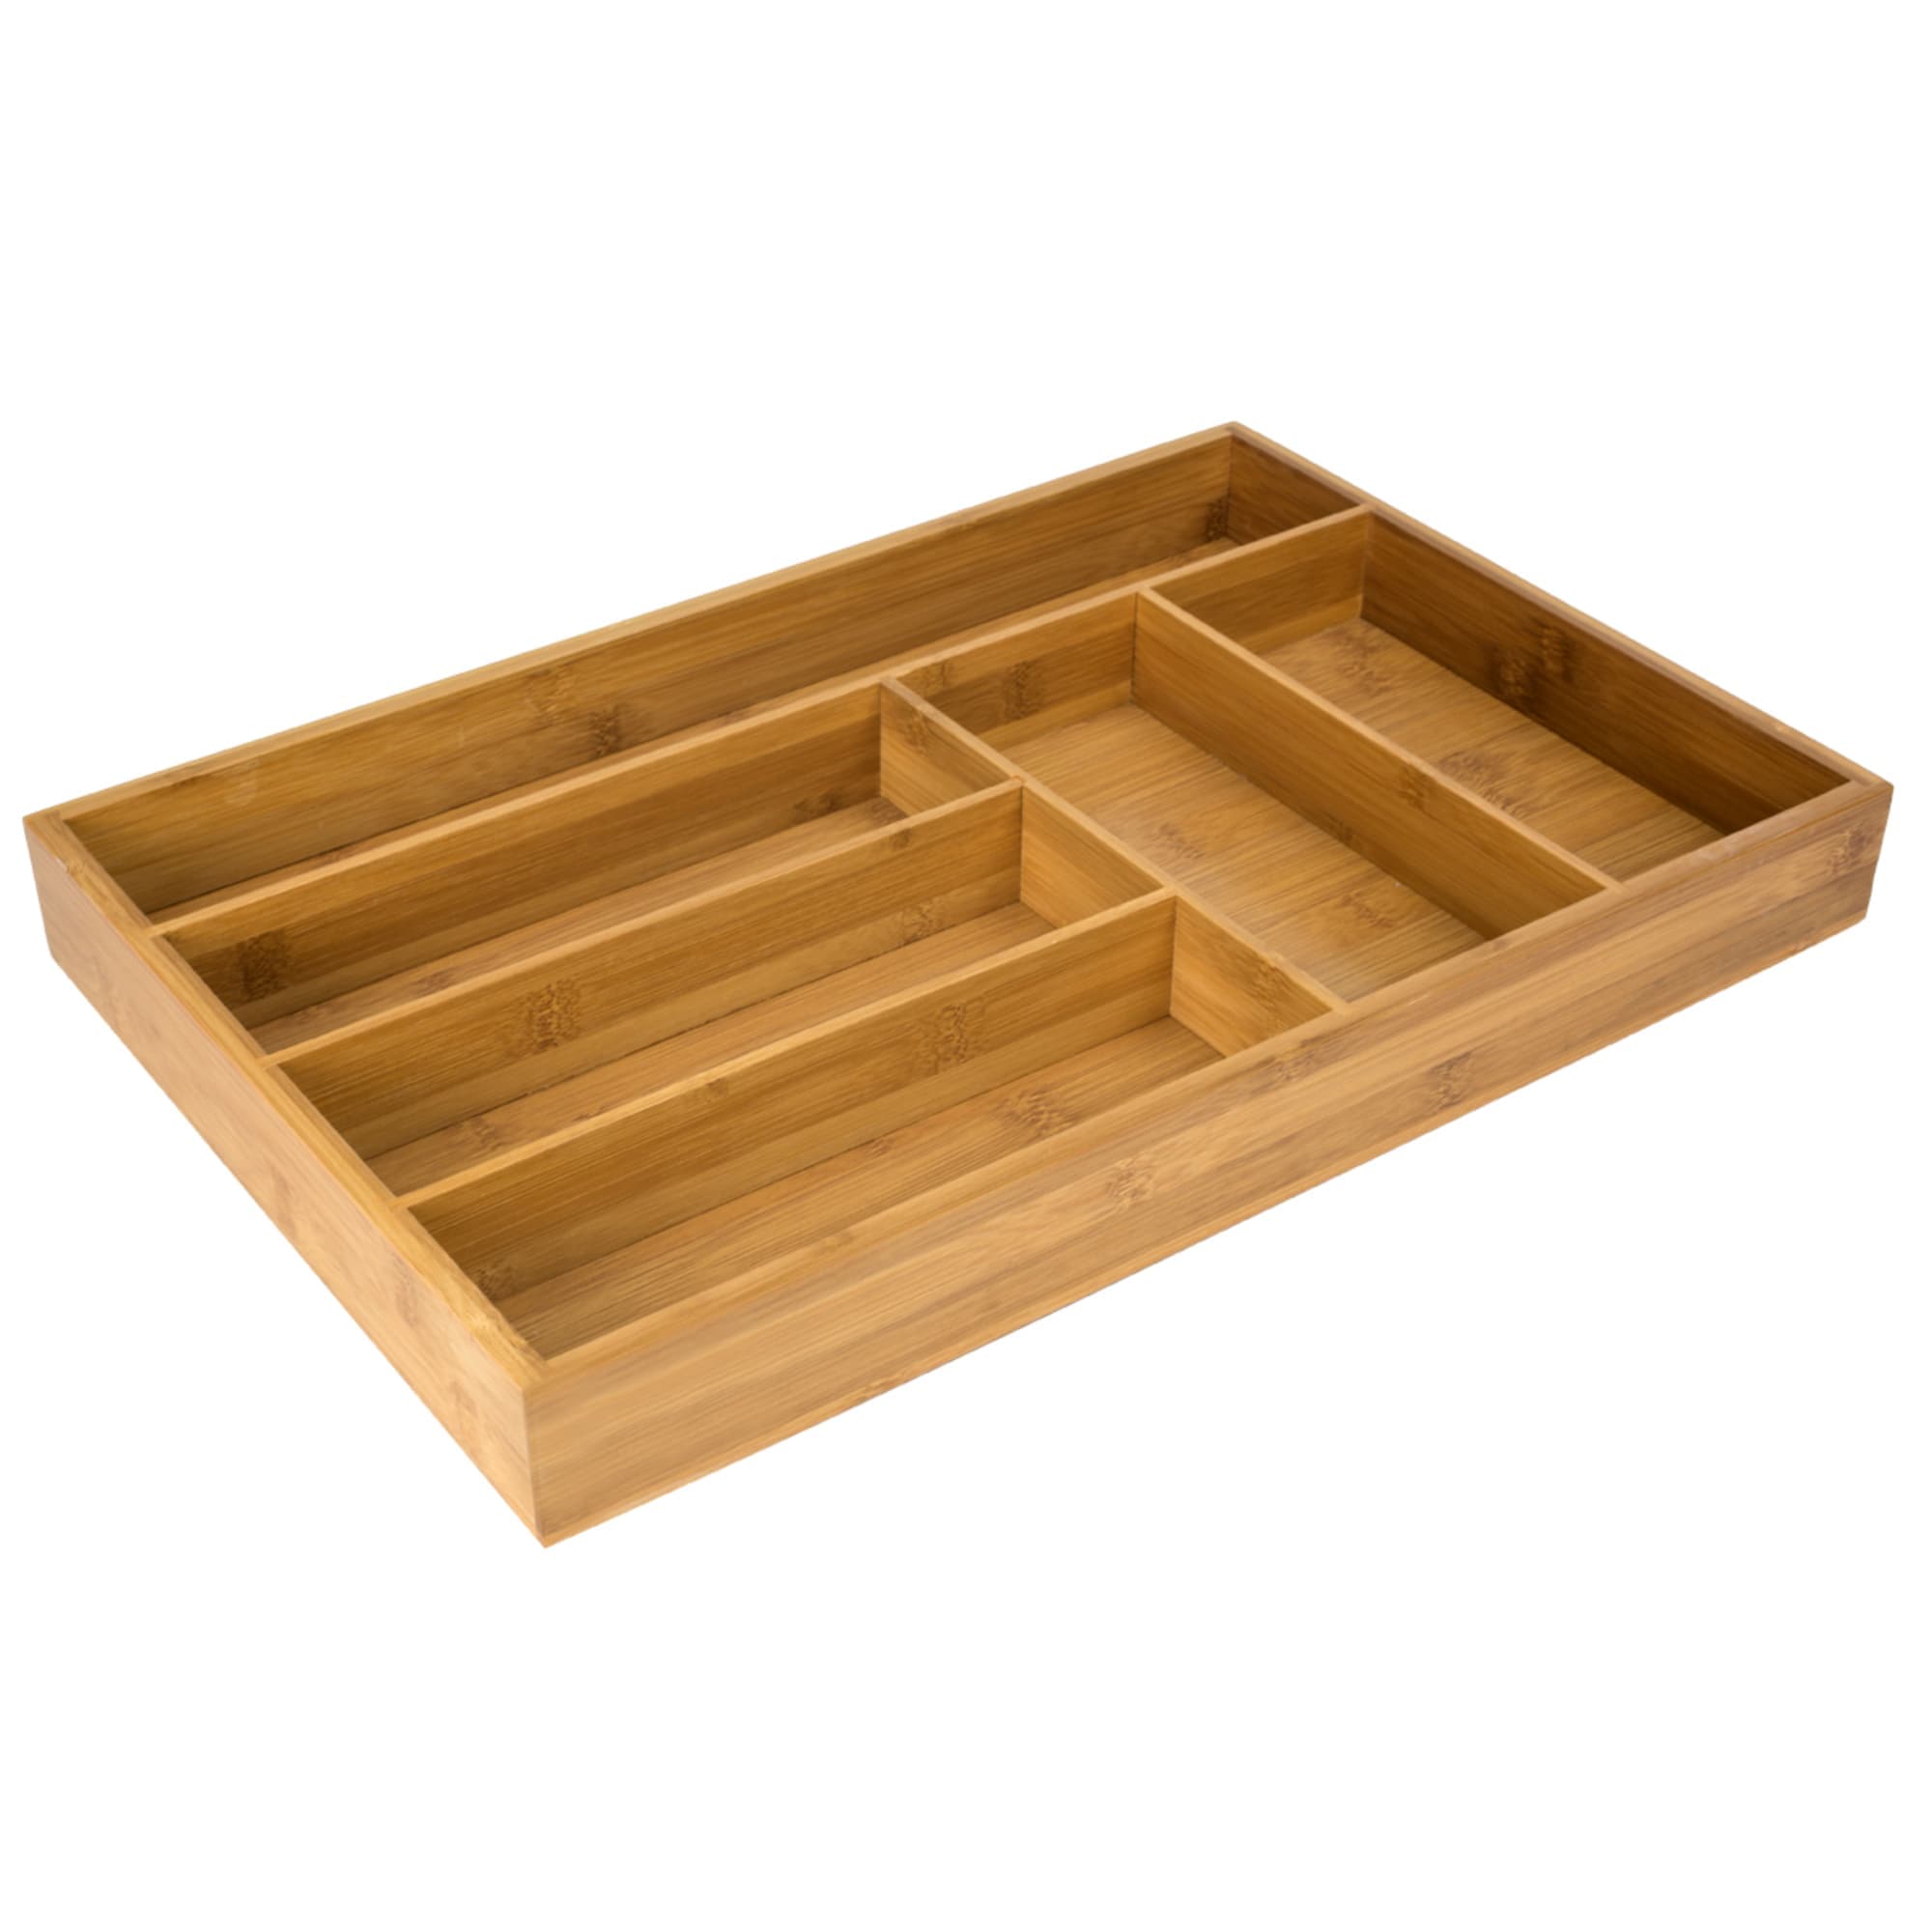 Home Basics Bamboo Cutlery Tray $15.00 EACH, CASE PACK OF 6